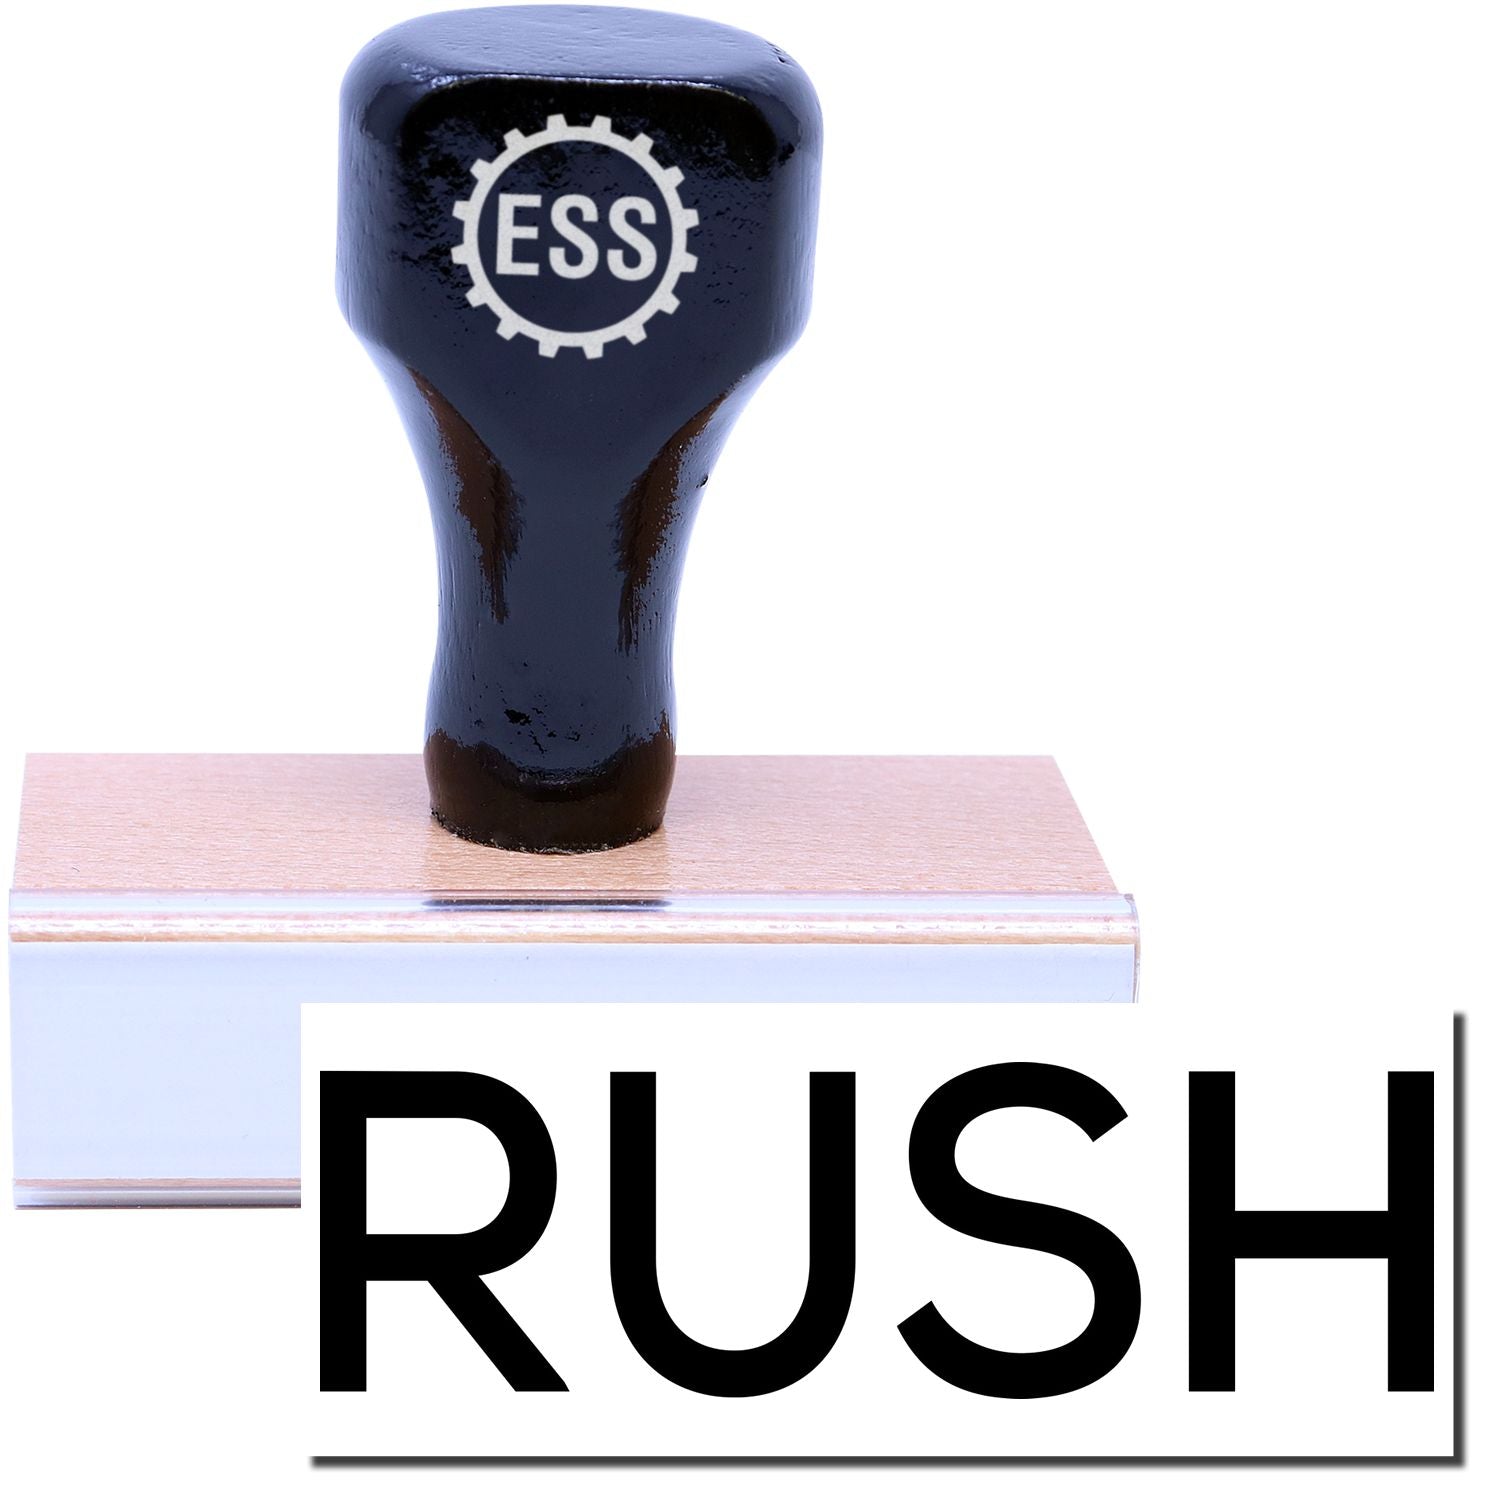 A stock office rubber stamp with a stamped image showing how the text "RUSH" in a large skinny font is displayed after stamping.